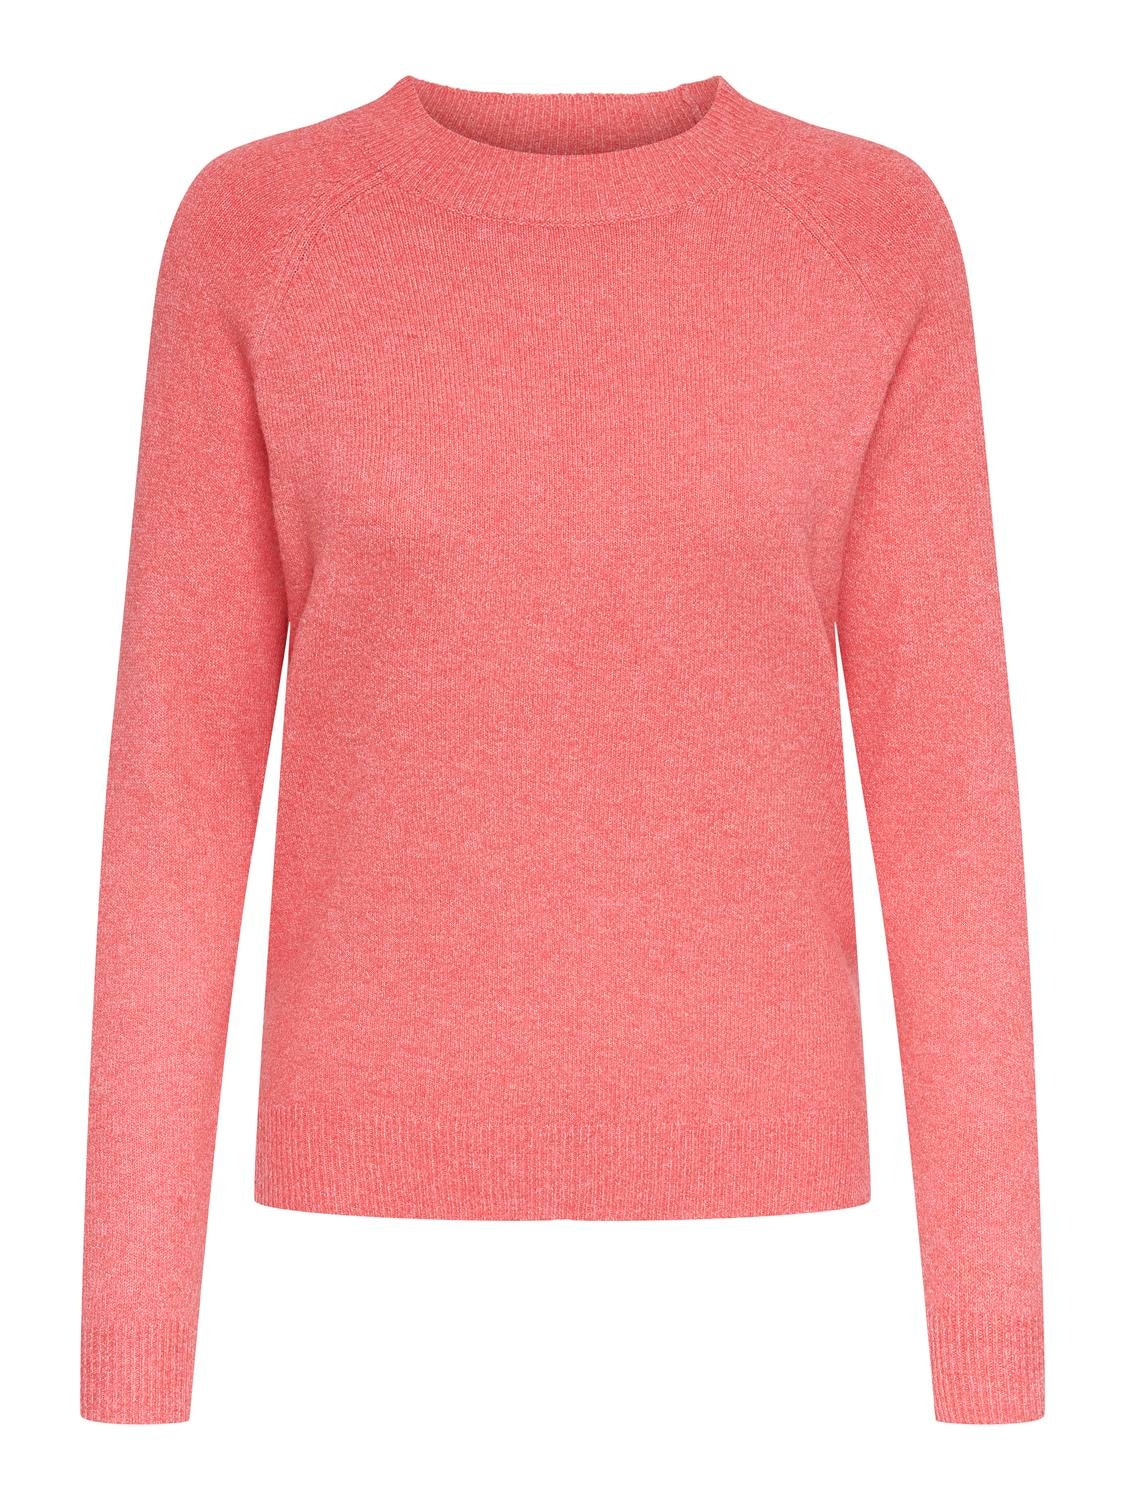 ONLY O-hals Geribde mouwuiteinden Pullover -Sun Kissed Coral - 15204279